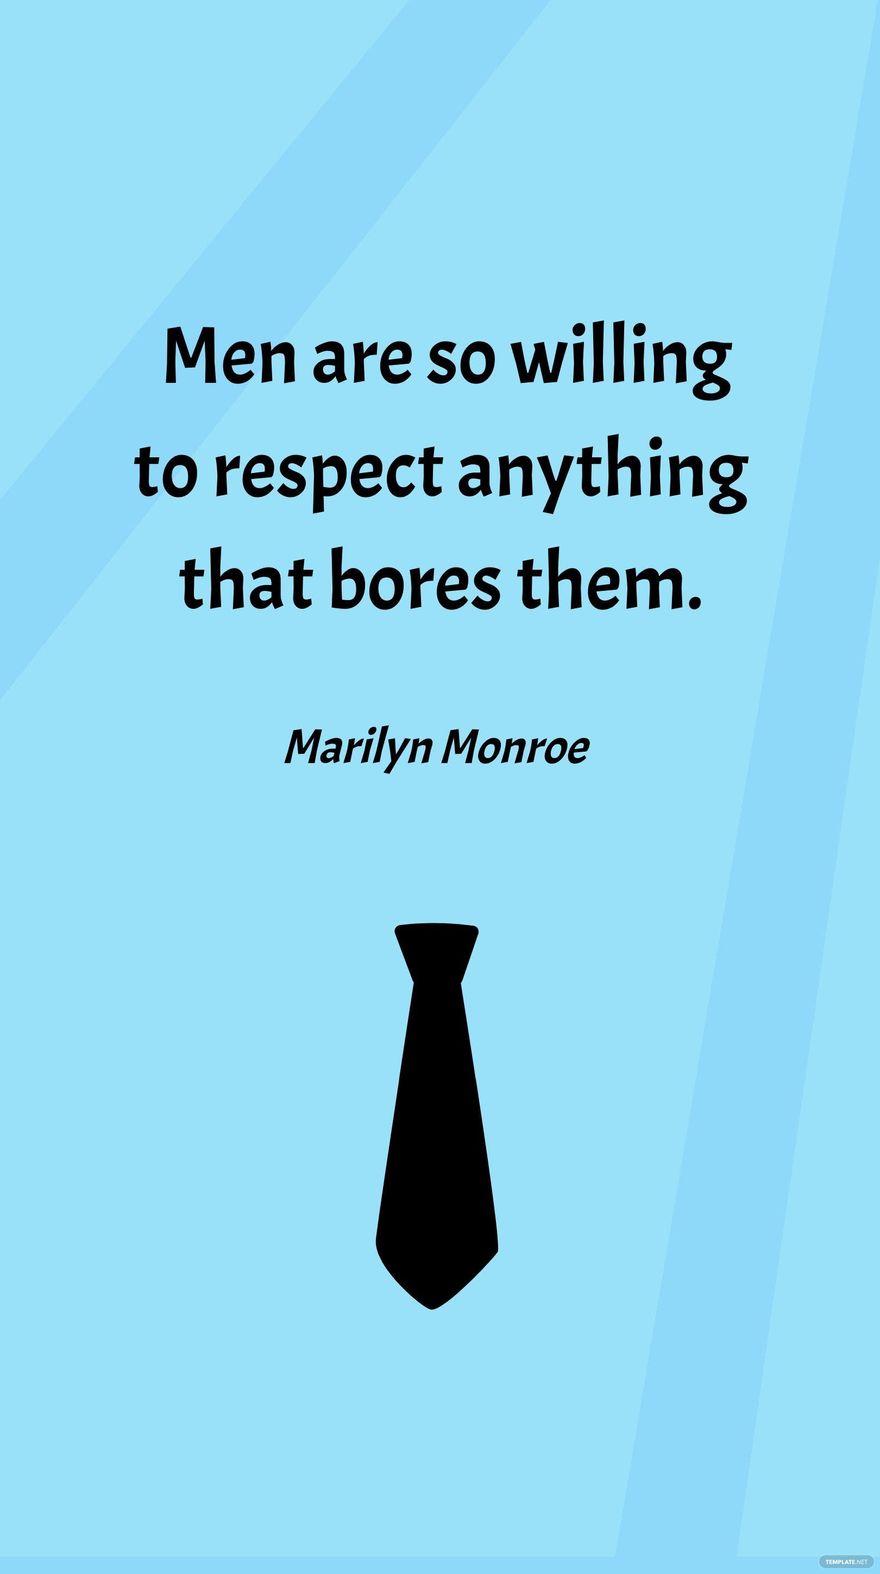 Marilyn Monroe- Men are so willing to respect anything that bores them.